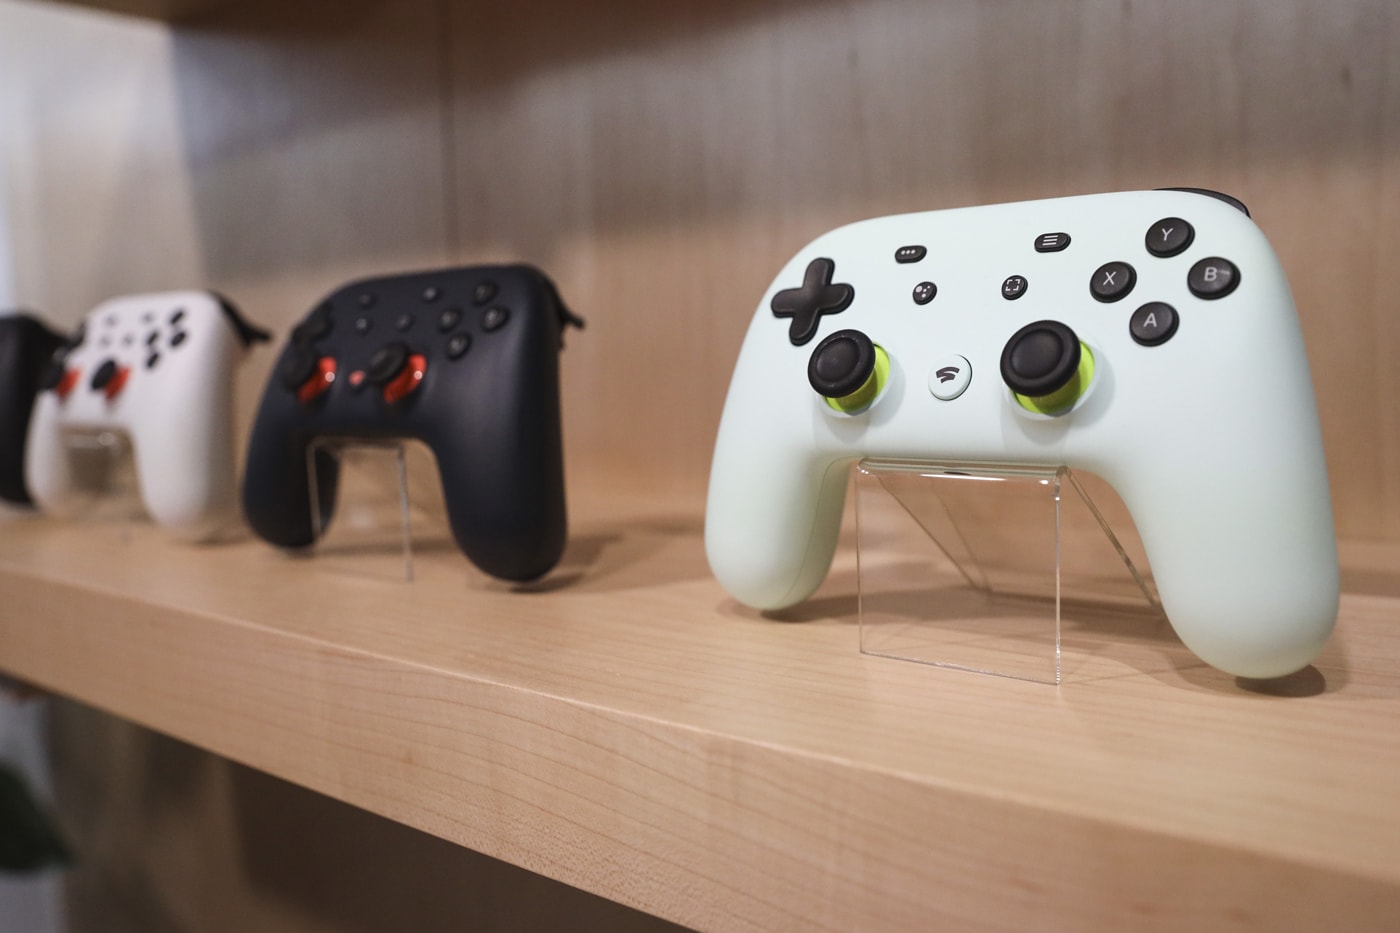 google stadia launch titles games announcement video game console gaming streaming